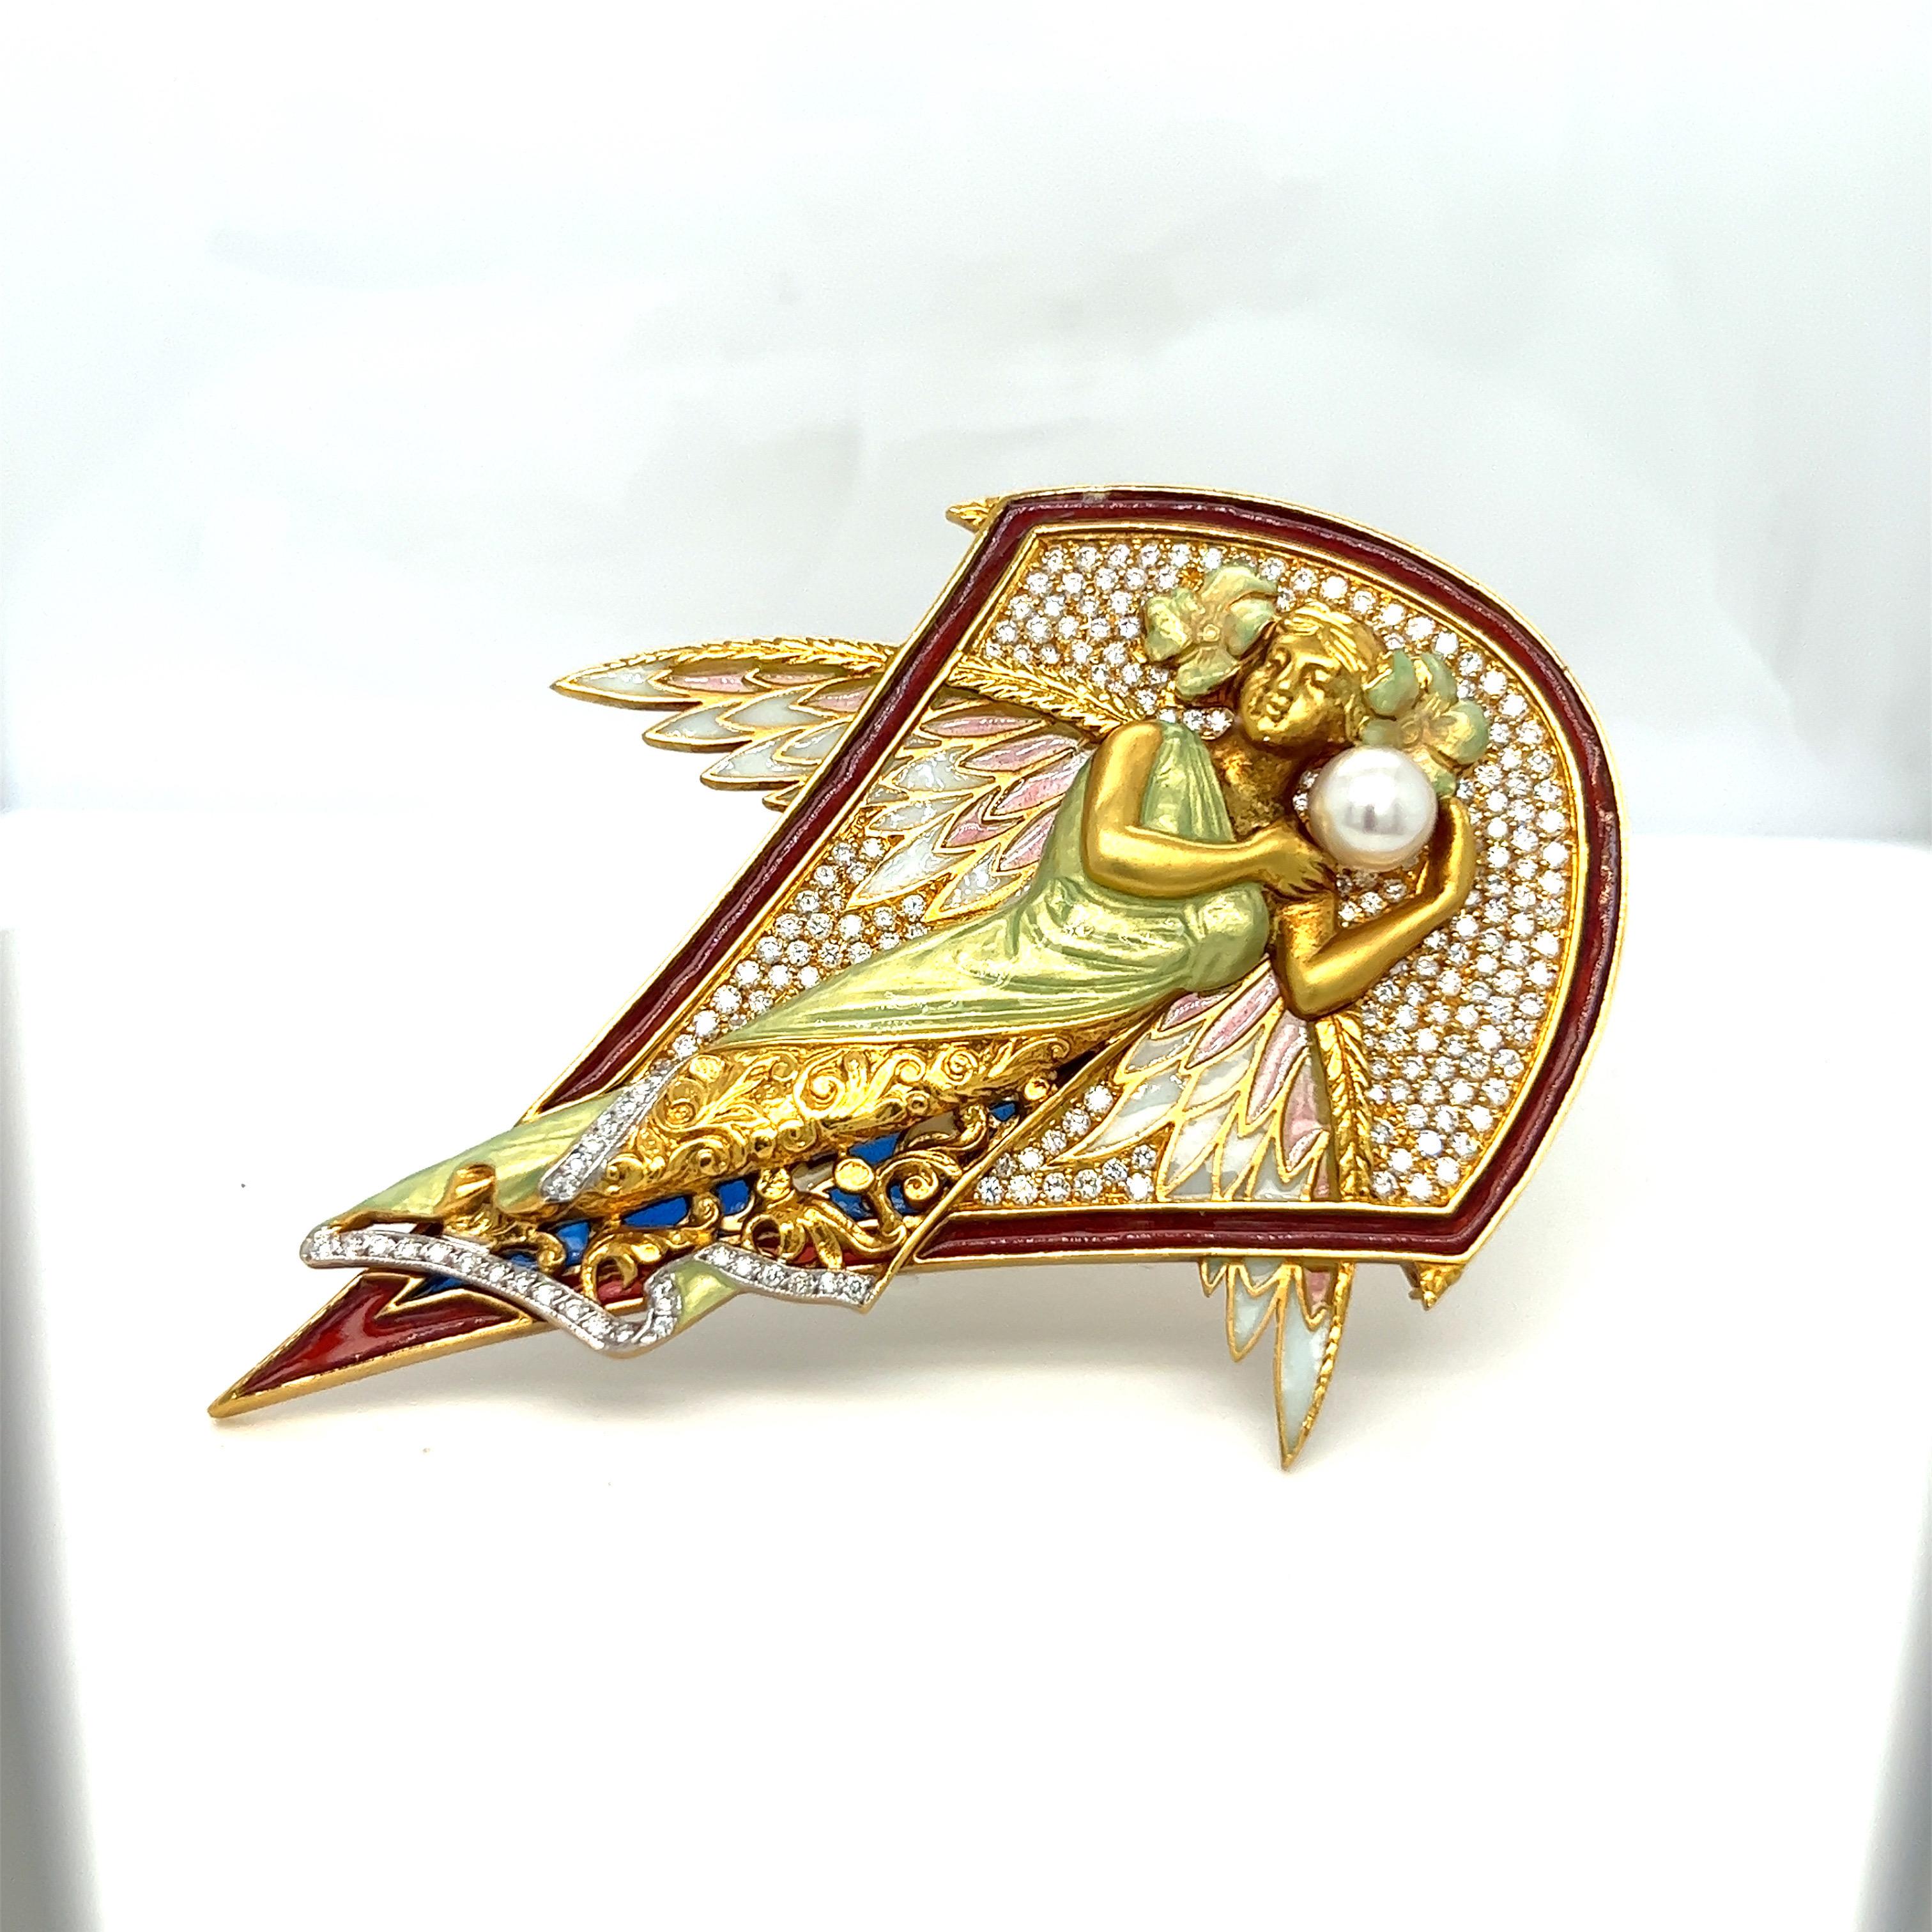 Masriera 18 KT YG Winged Nymph Brooch with Dia 1.94CT, Enamel and Pearls For Sale 2